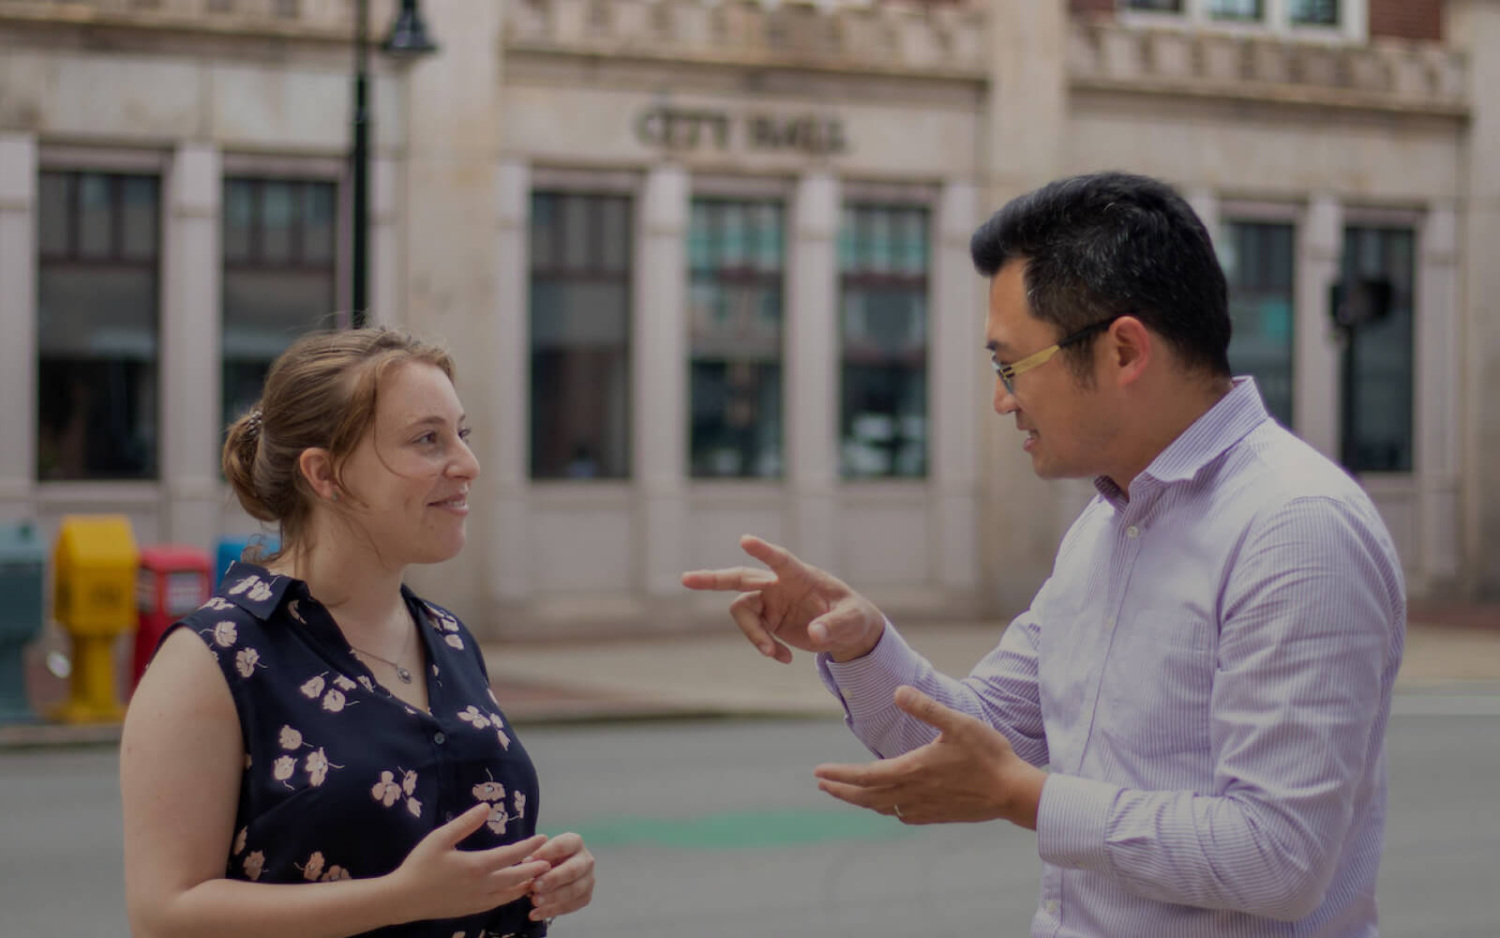 A man and woman talk animatedly in front of a city hall building.